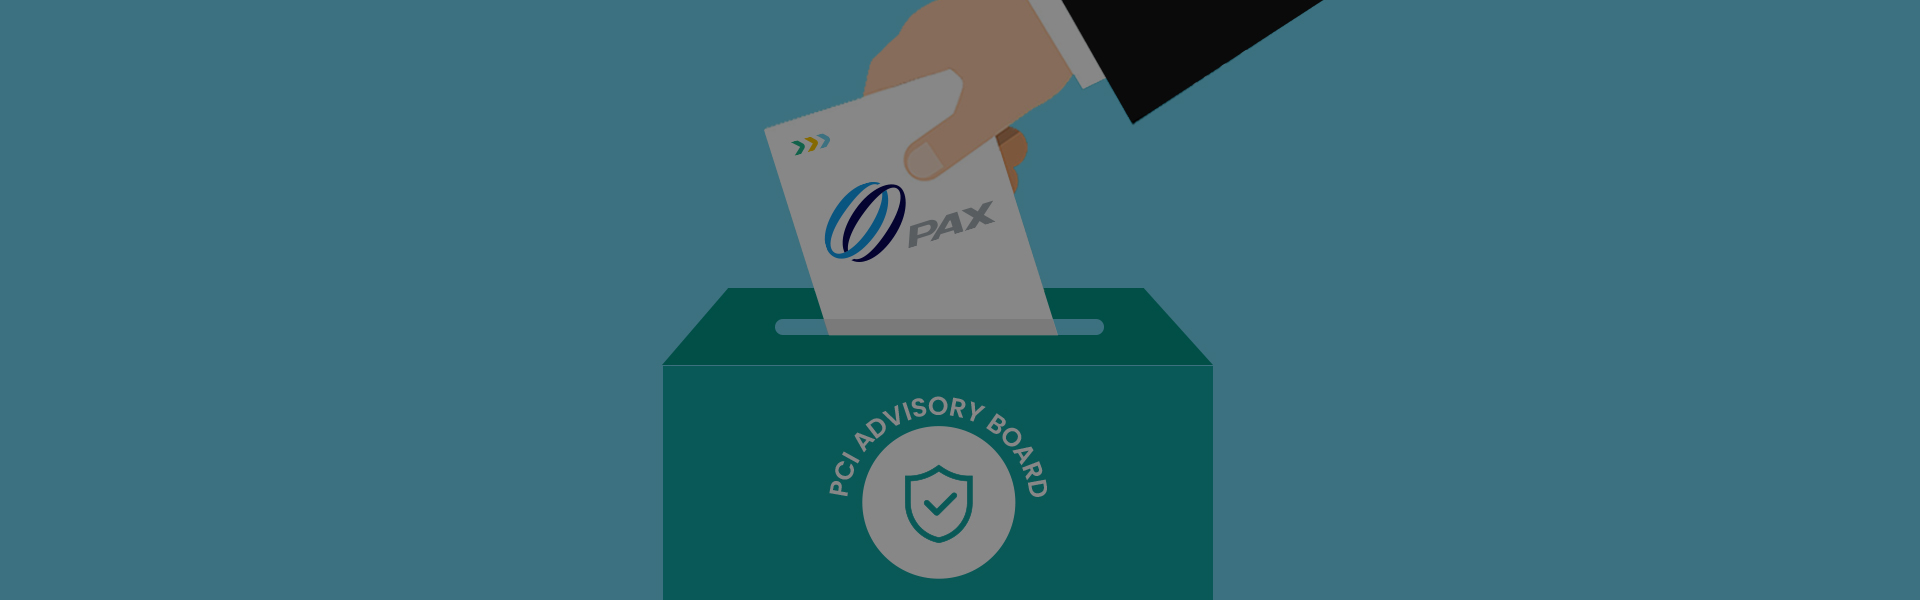 PAX is the first Asian Payment Terminal Vendor elected to the PCI Advisory Board